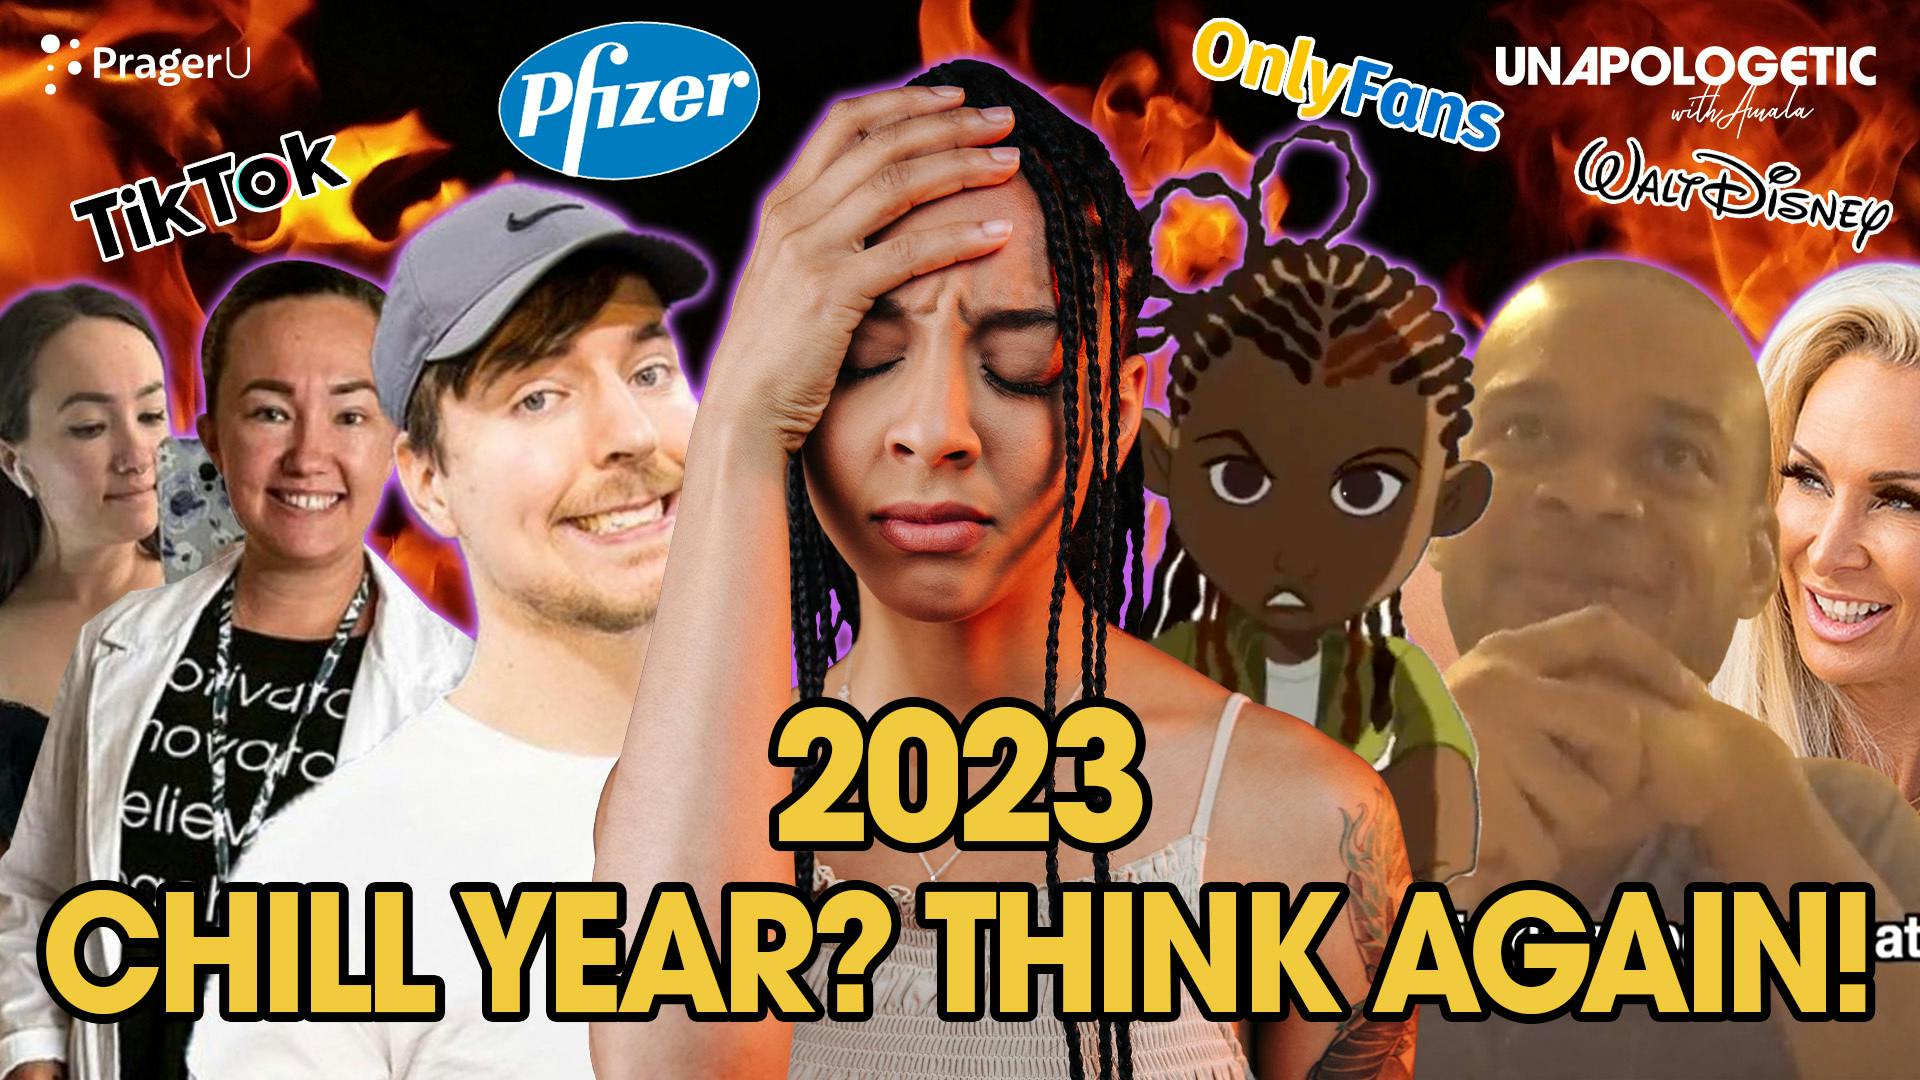 If You Were Hoping 2023 Would Be a Chill Year, Don’t Watch This: 2/3/2023